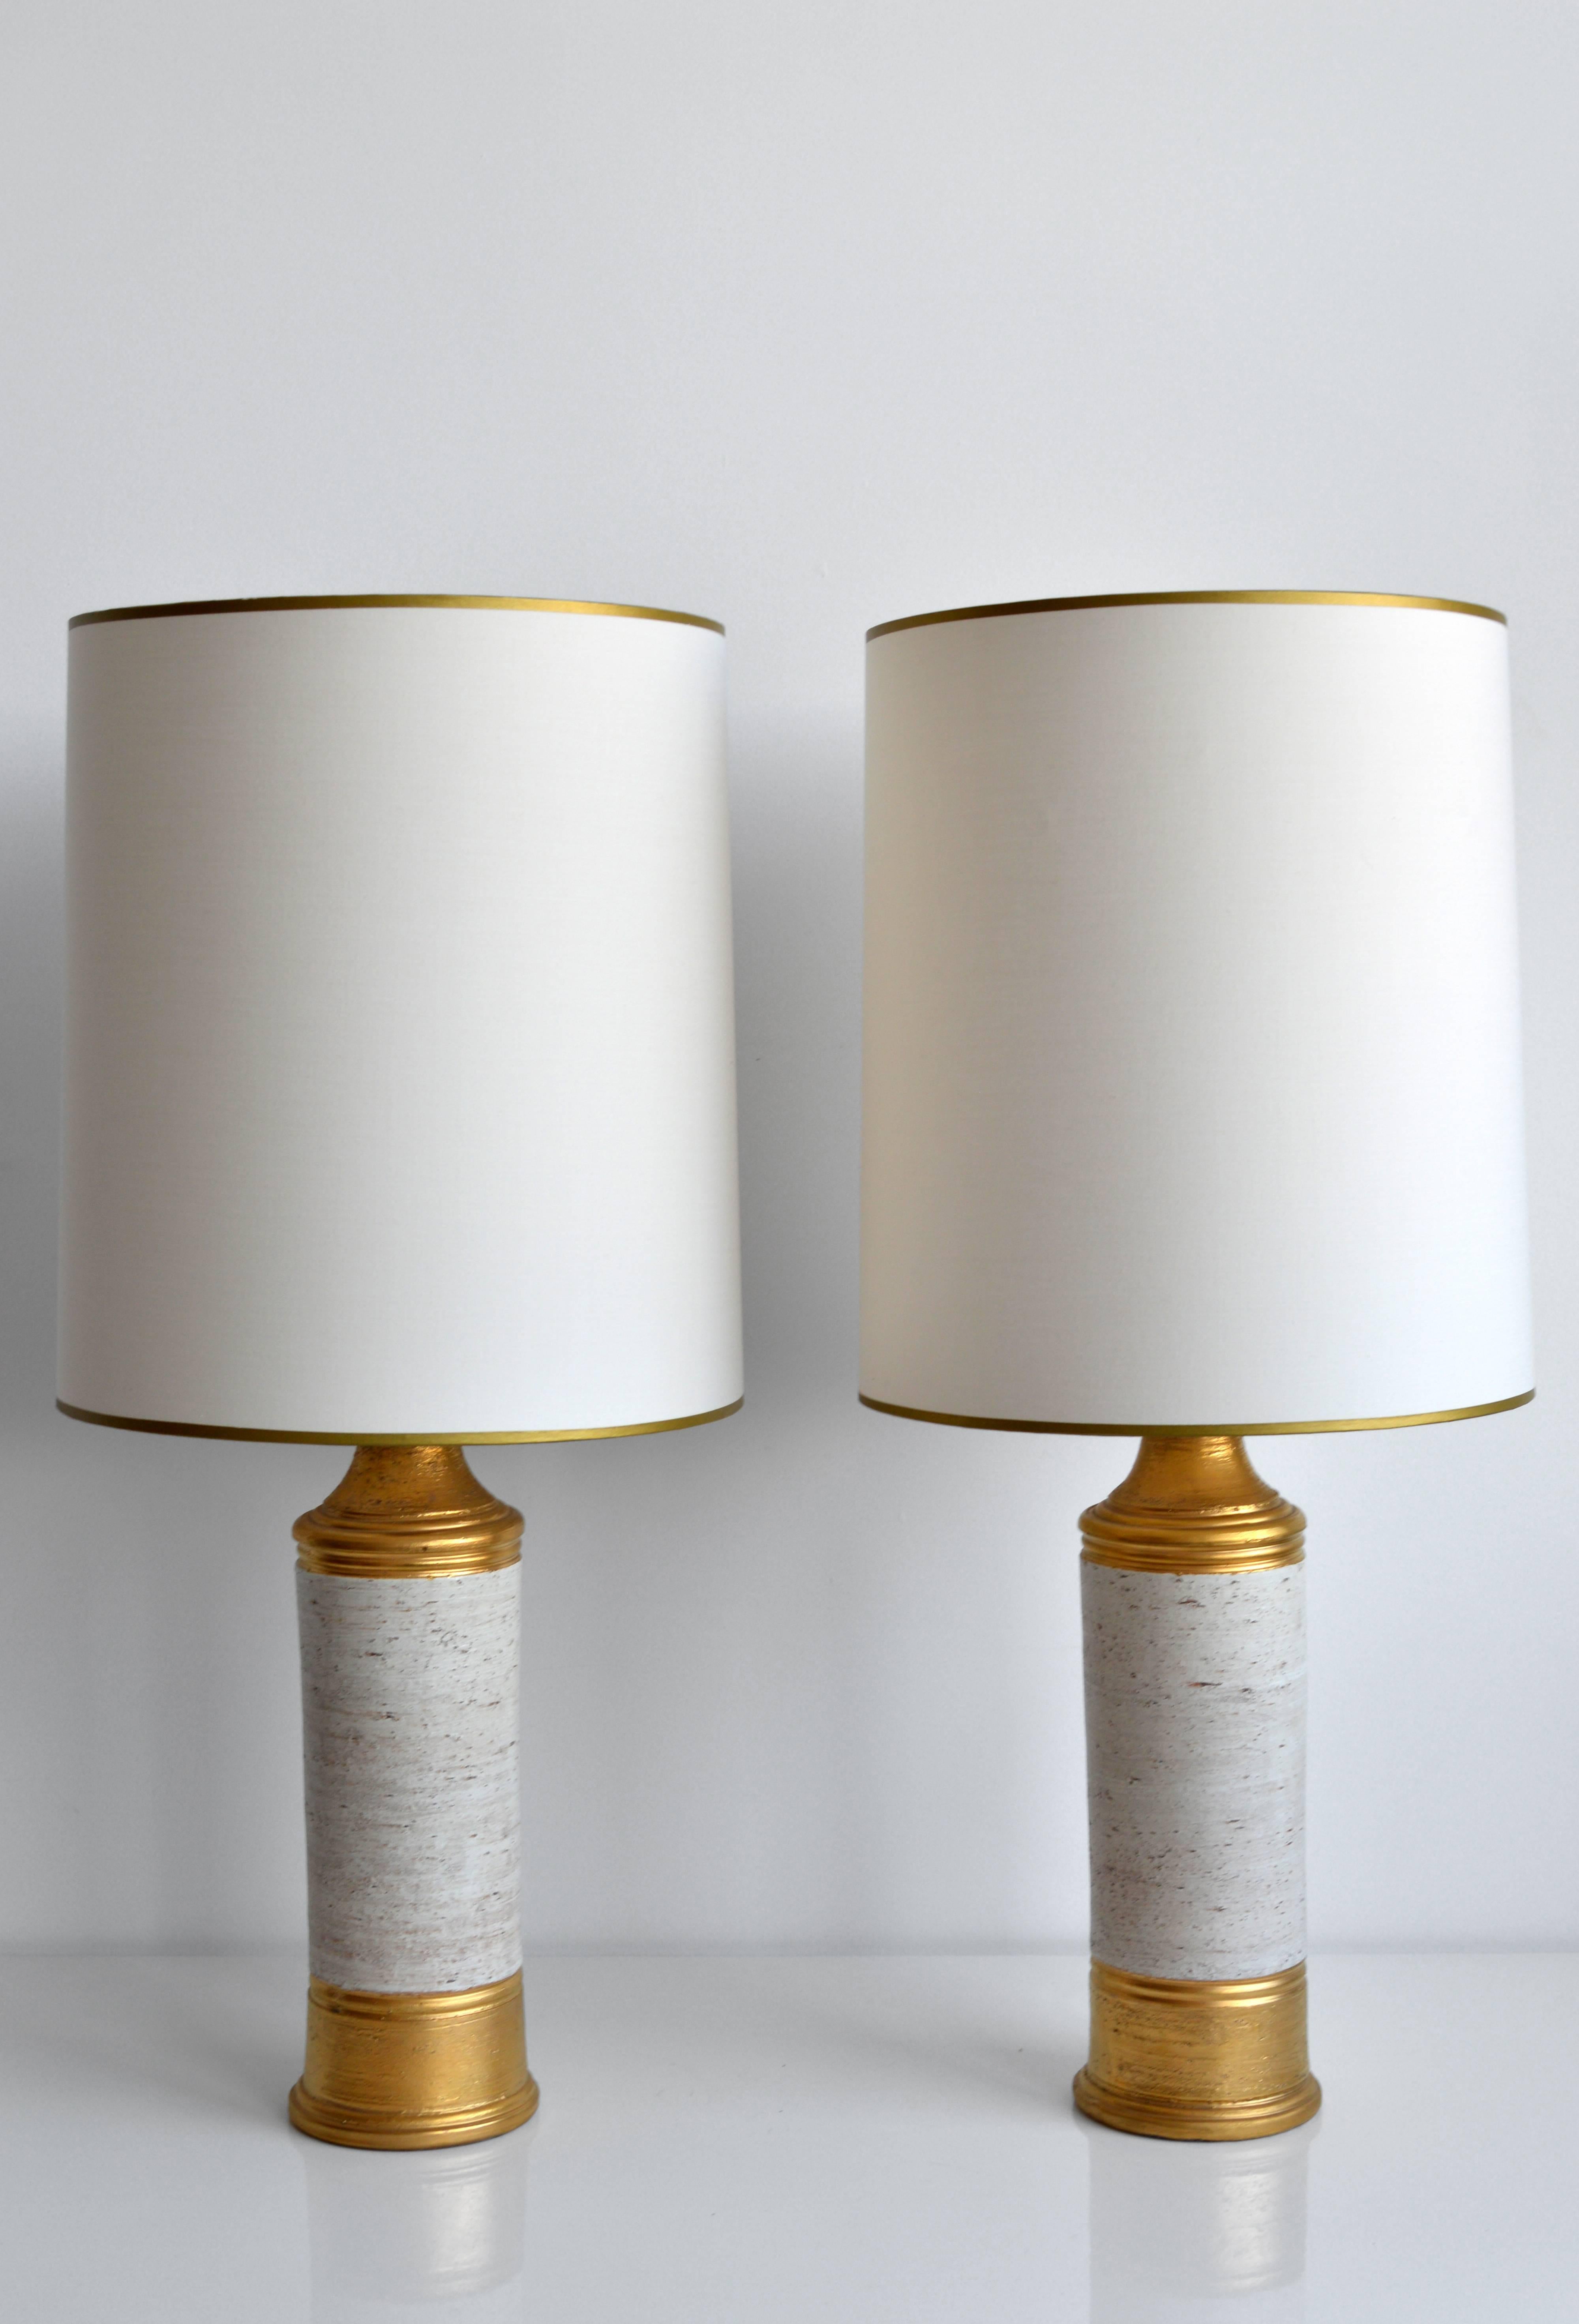 Pair of vintage table lamps by Italian ceramics company Bitossi for Bergboms, circa 1960s. Each lamp has a matte gold finish with an off-white 